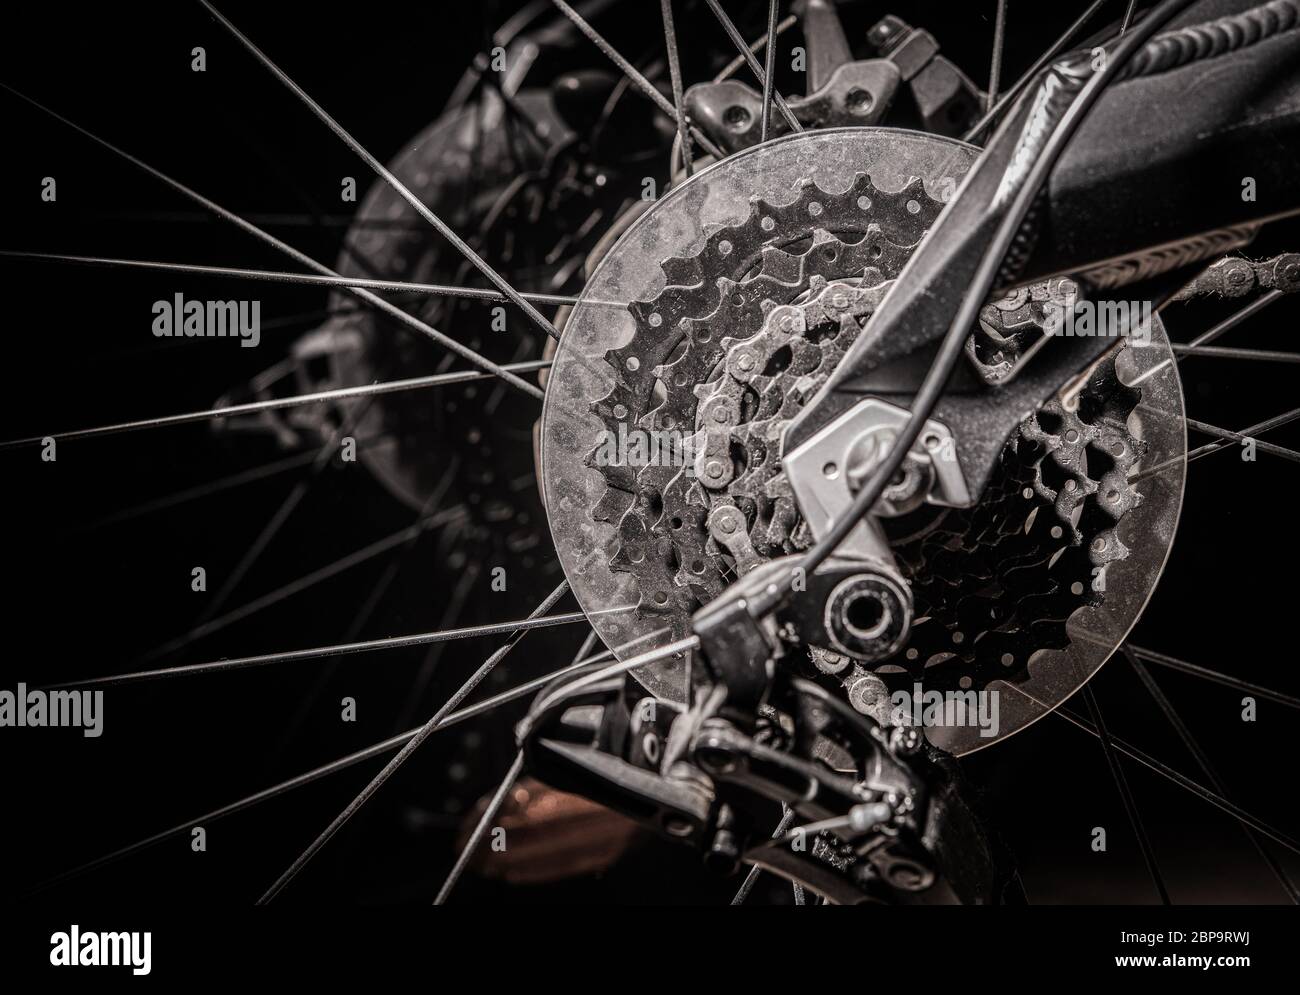 Close Up Of Bicycle Back Wheel With Metal Discs Spikes Chain And Gears. Stock Photo